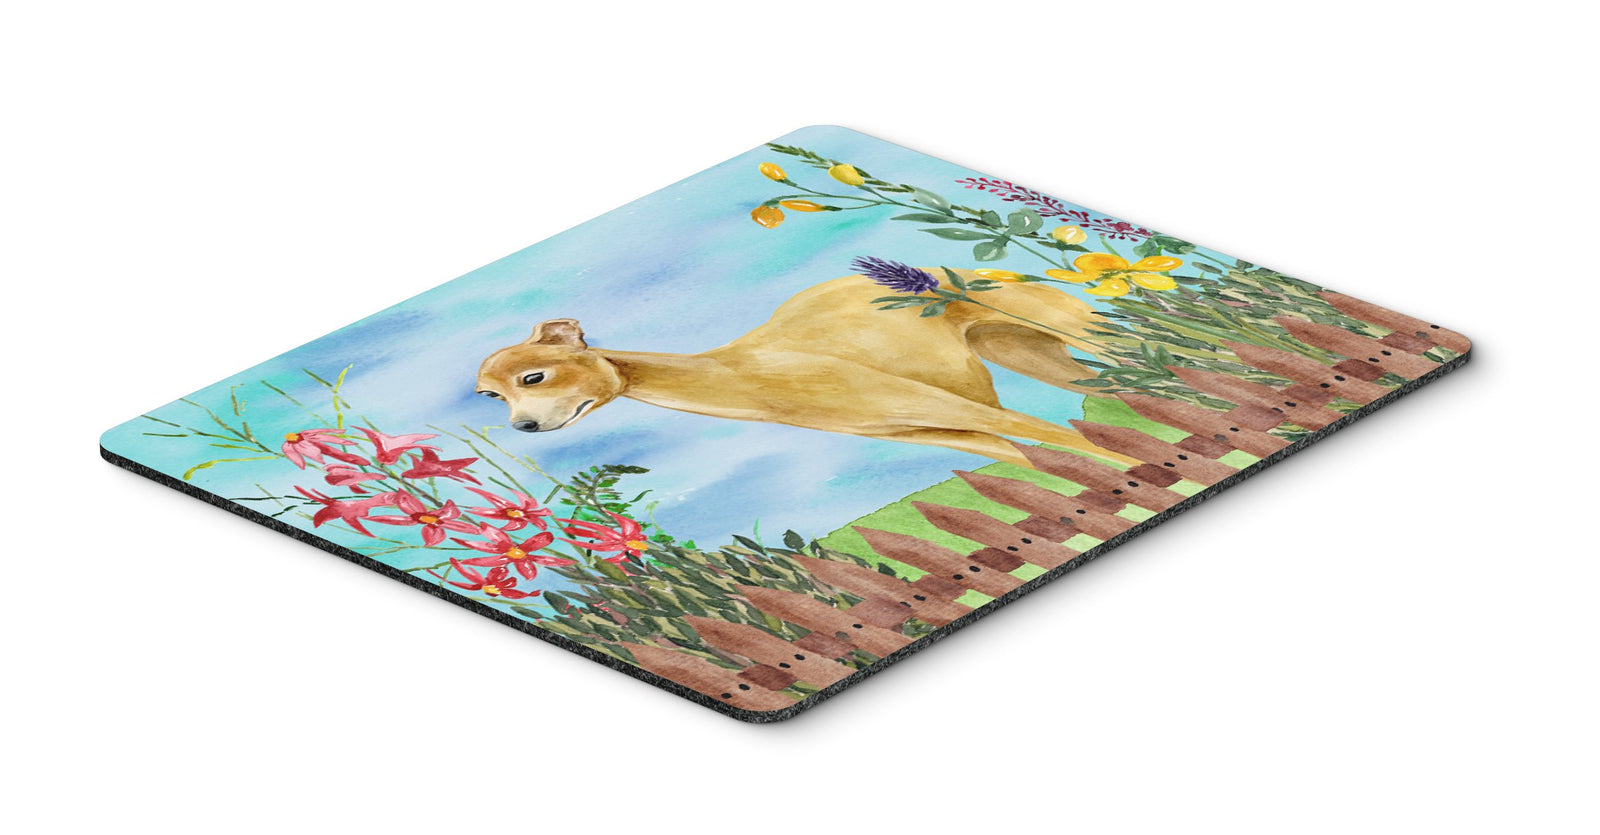 Italian Greyhound Spring Mouse Pad, Hot Pad or Trivet CK1260MP by Caroline's Treasures